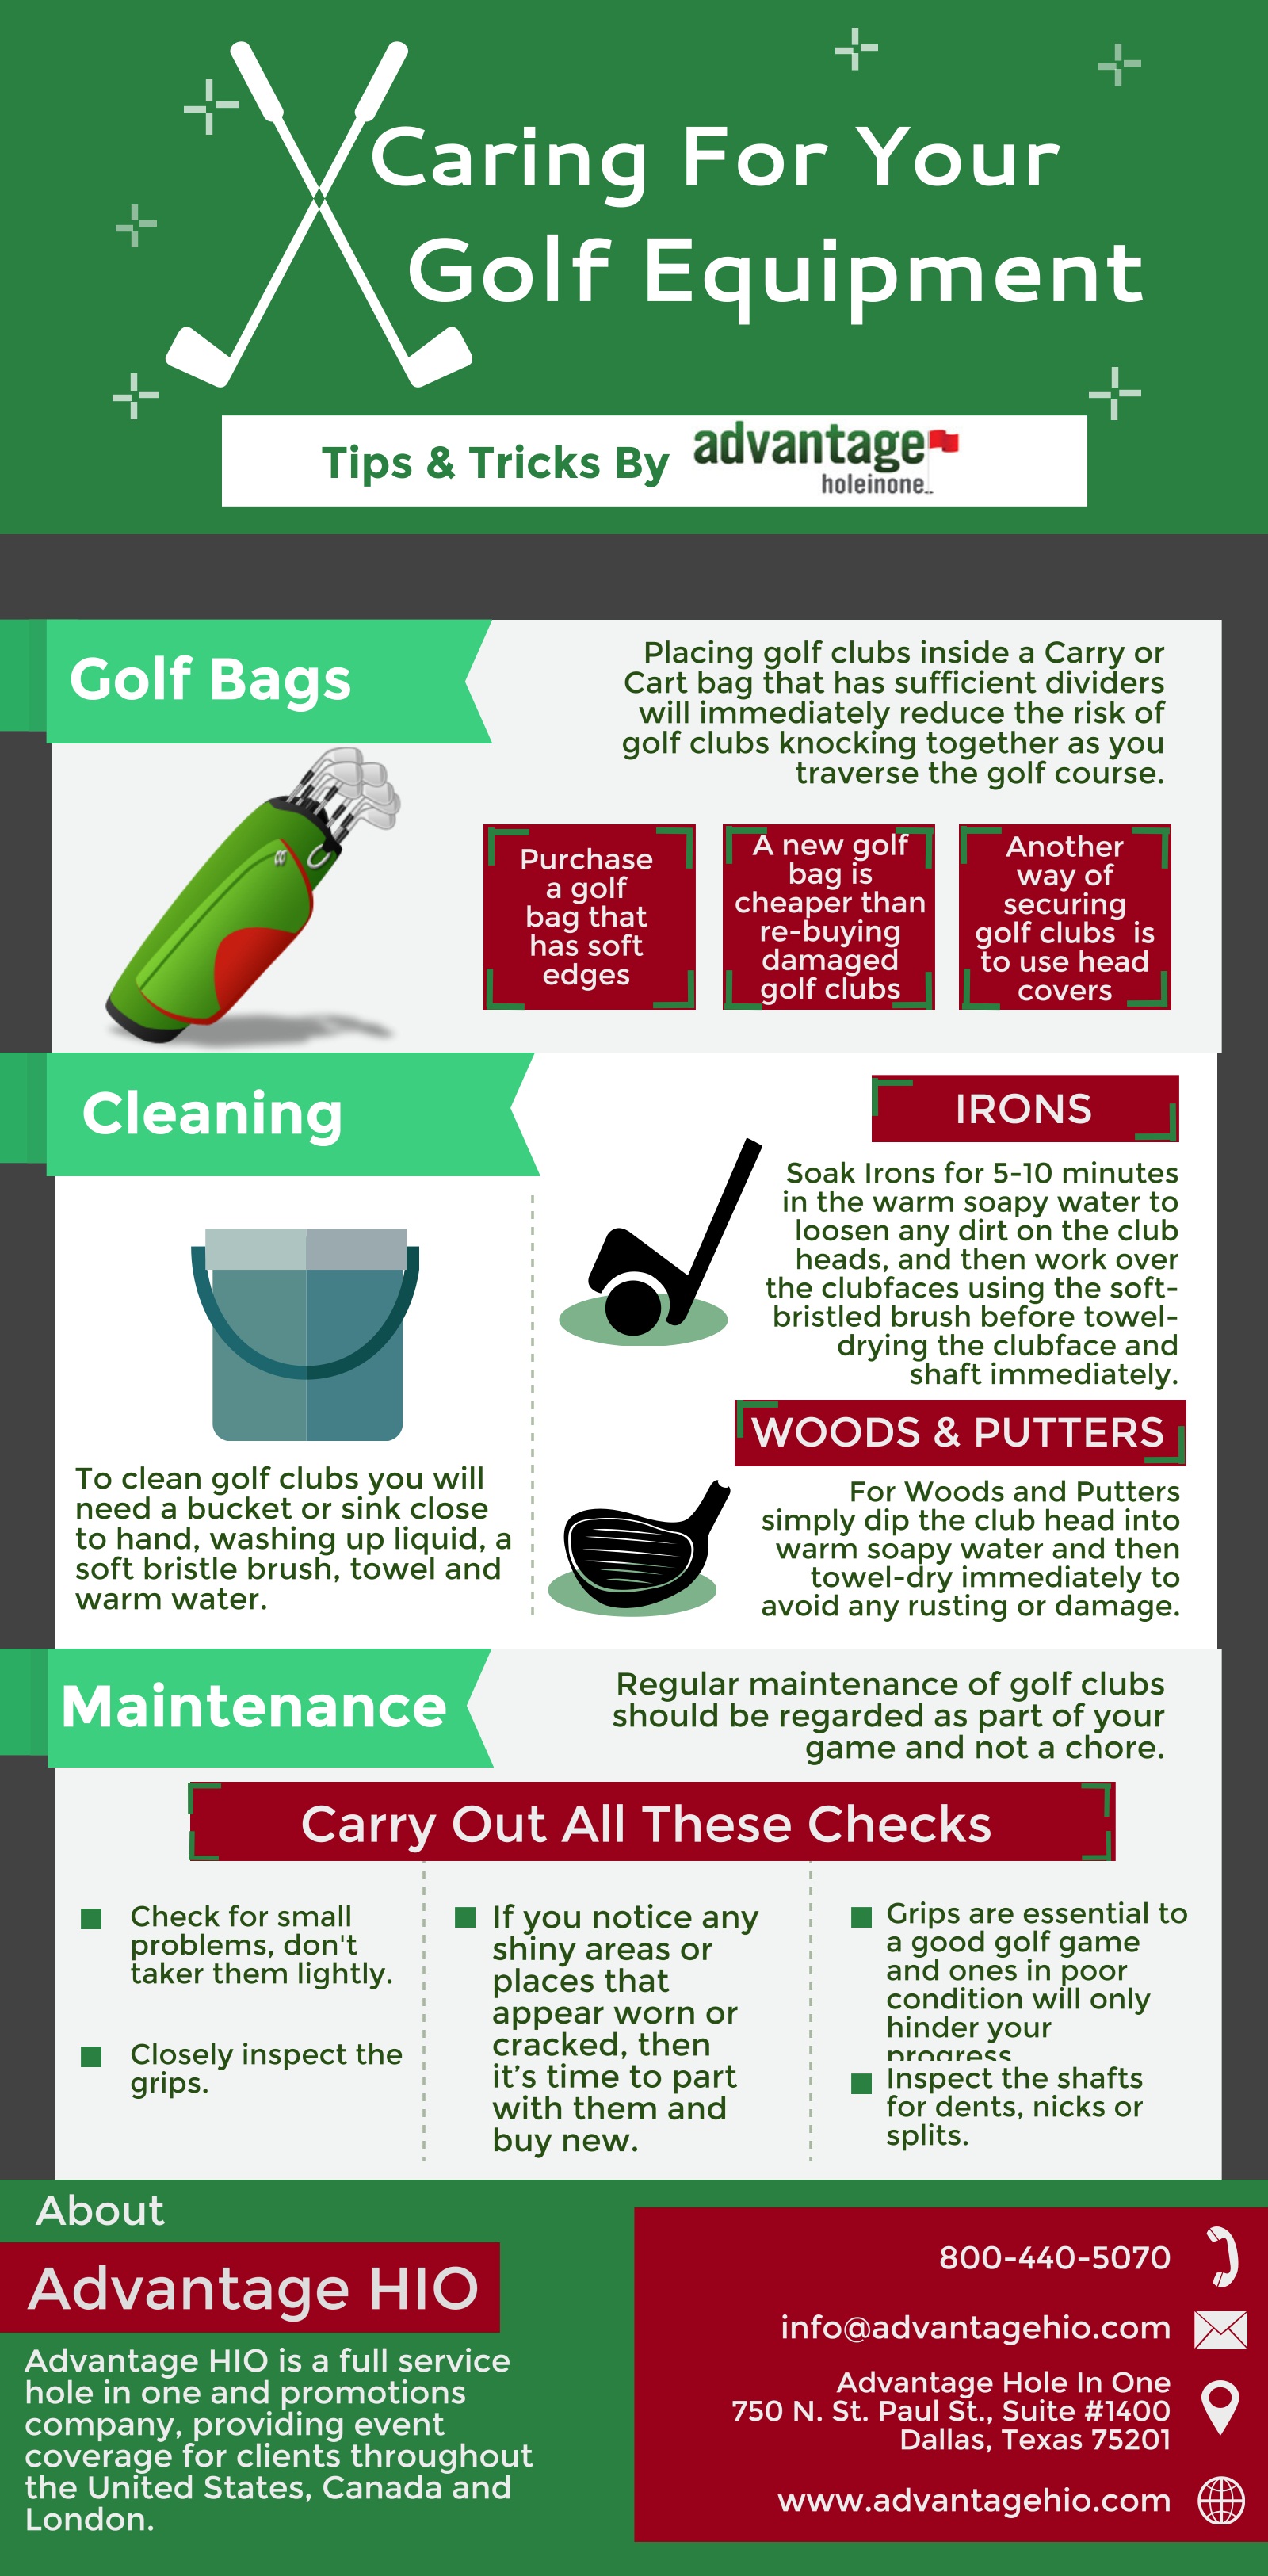 Caring for your Golf Equipment